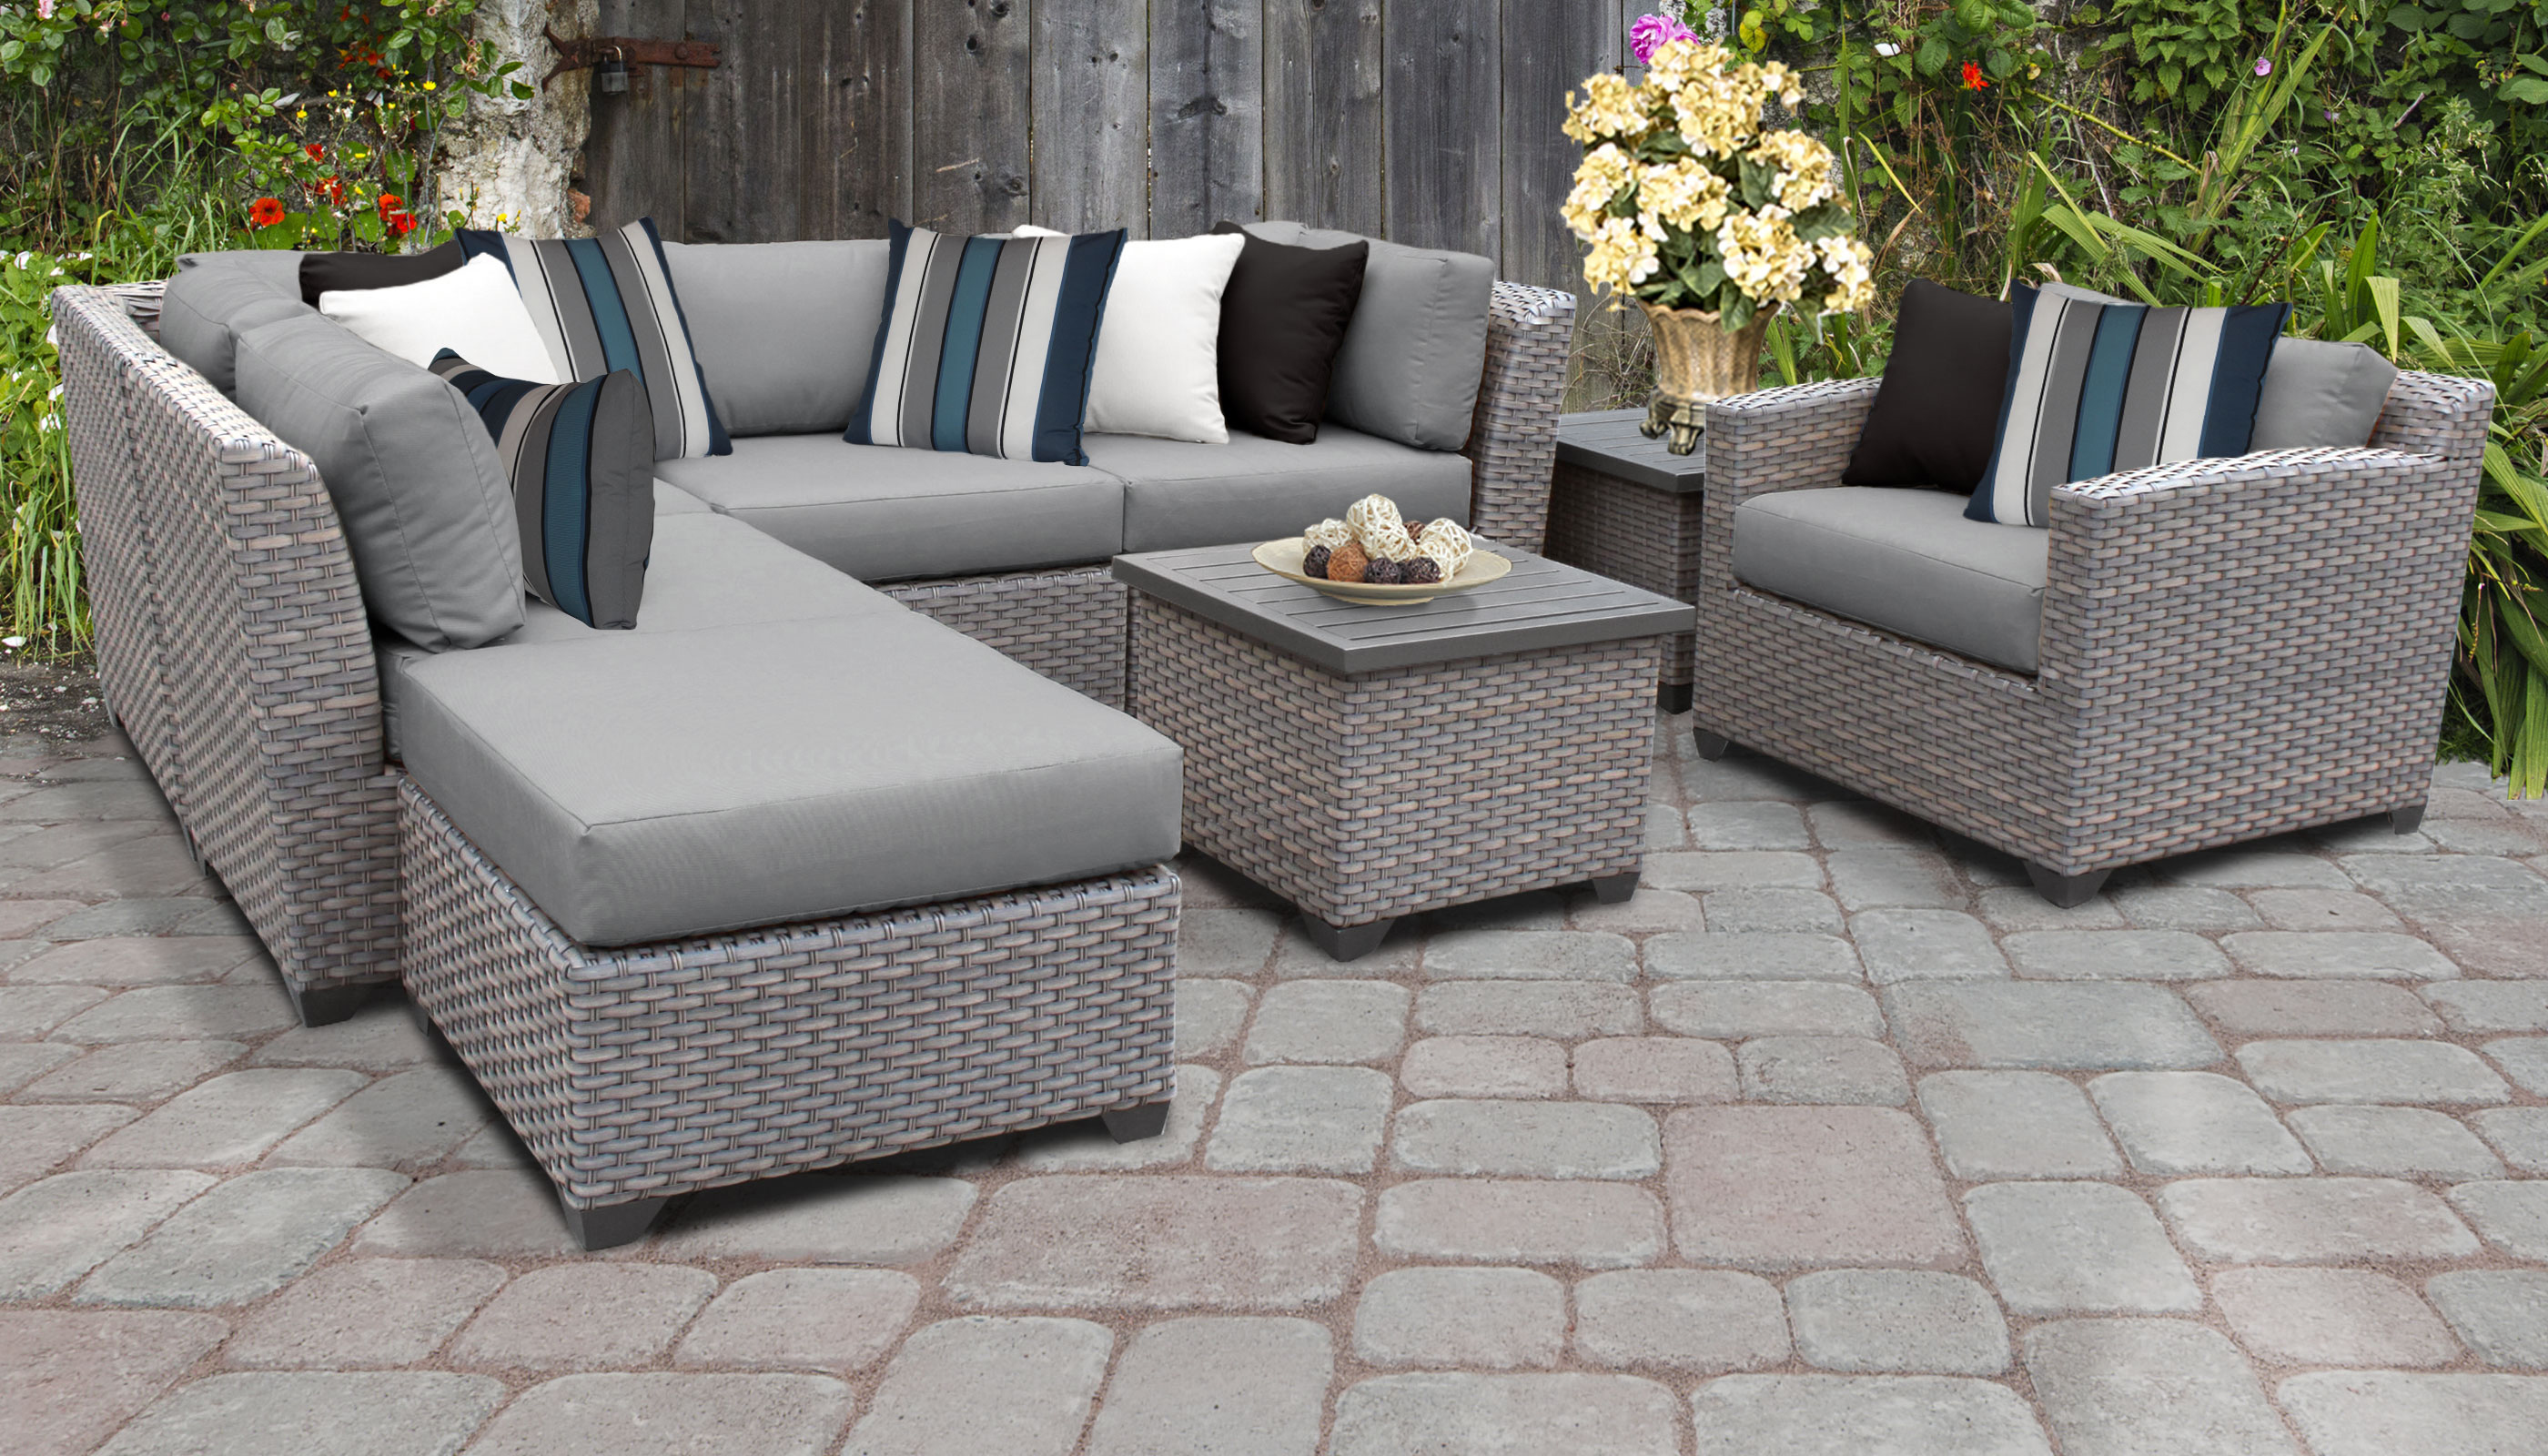 TK Classics Florence Wicker 8 Piece Patio Conversation Set with End Table and 2 Sets of Cushion Covers - image 1 of 11